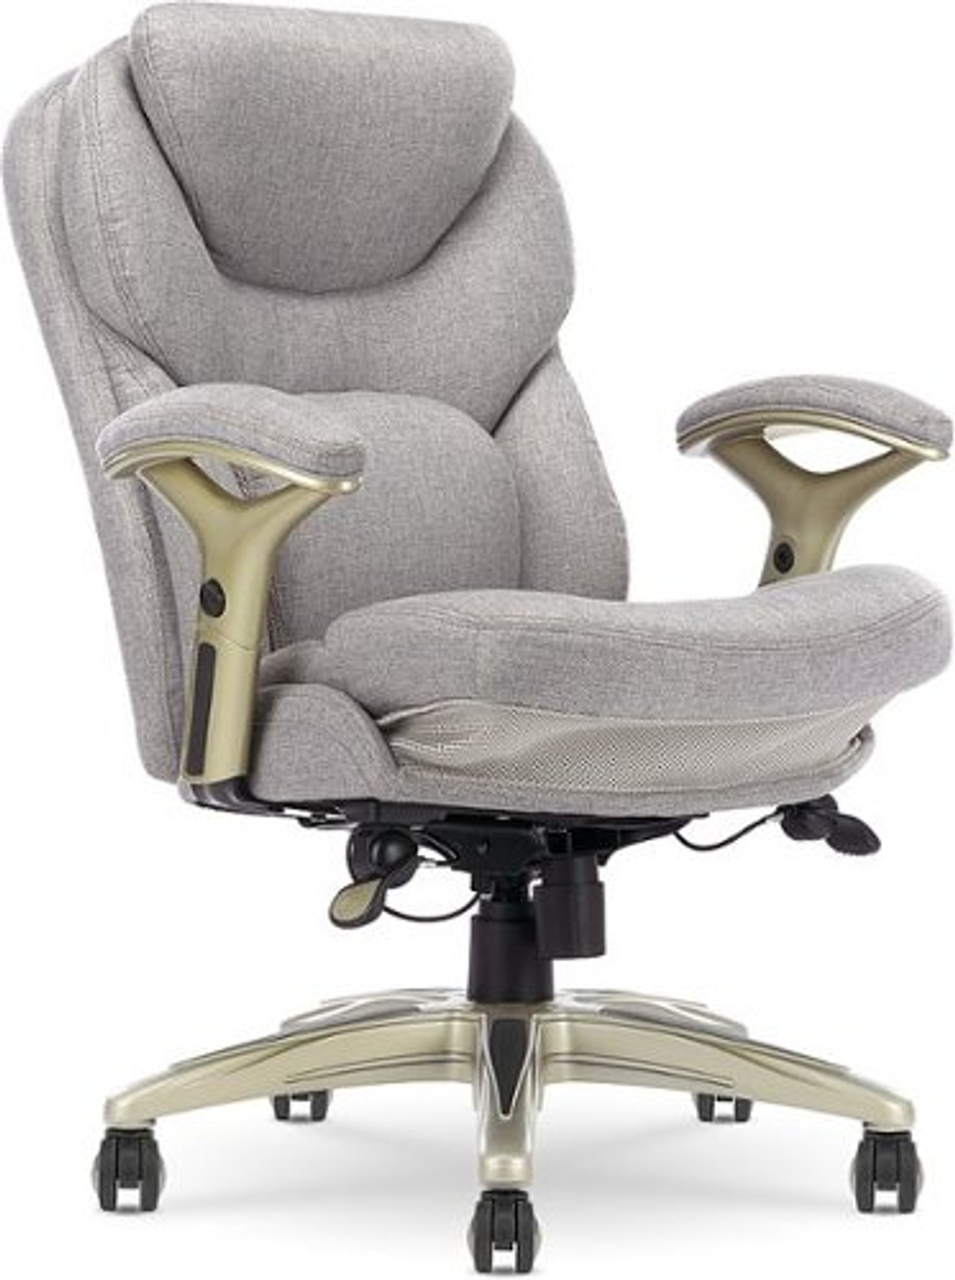 Serta - Upholstered Back in Motion Health & Wellness Manager Office Chair - Fabric - Light Gray